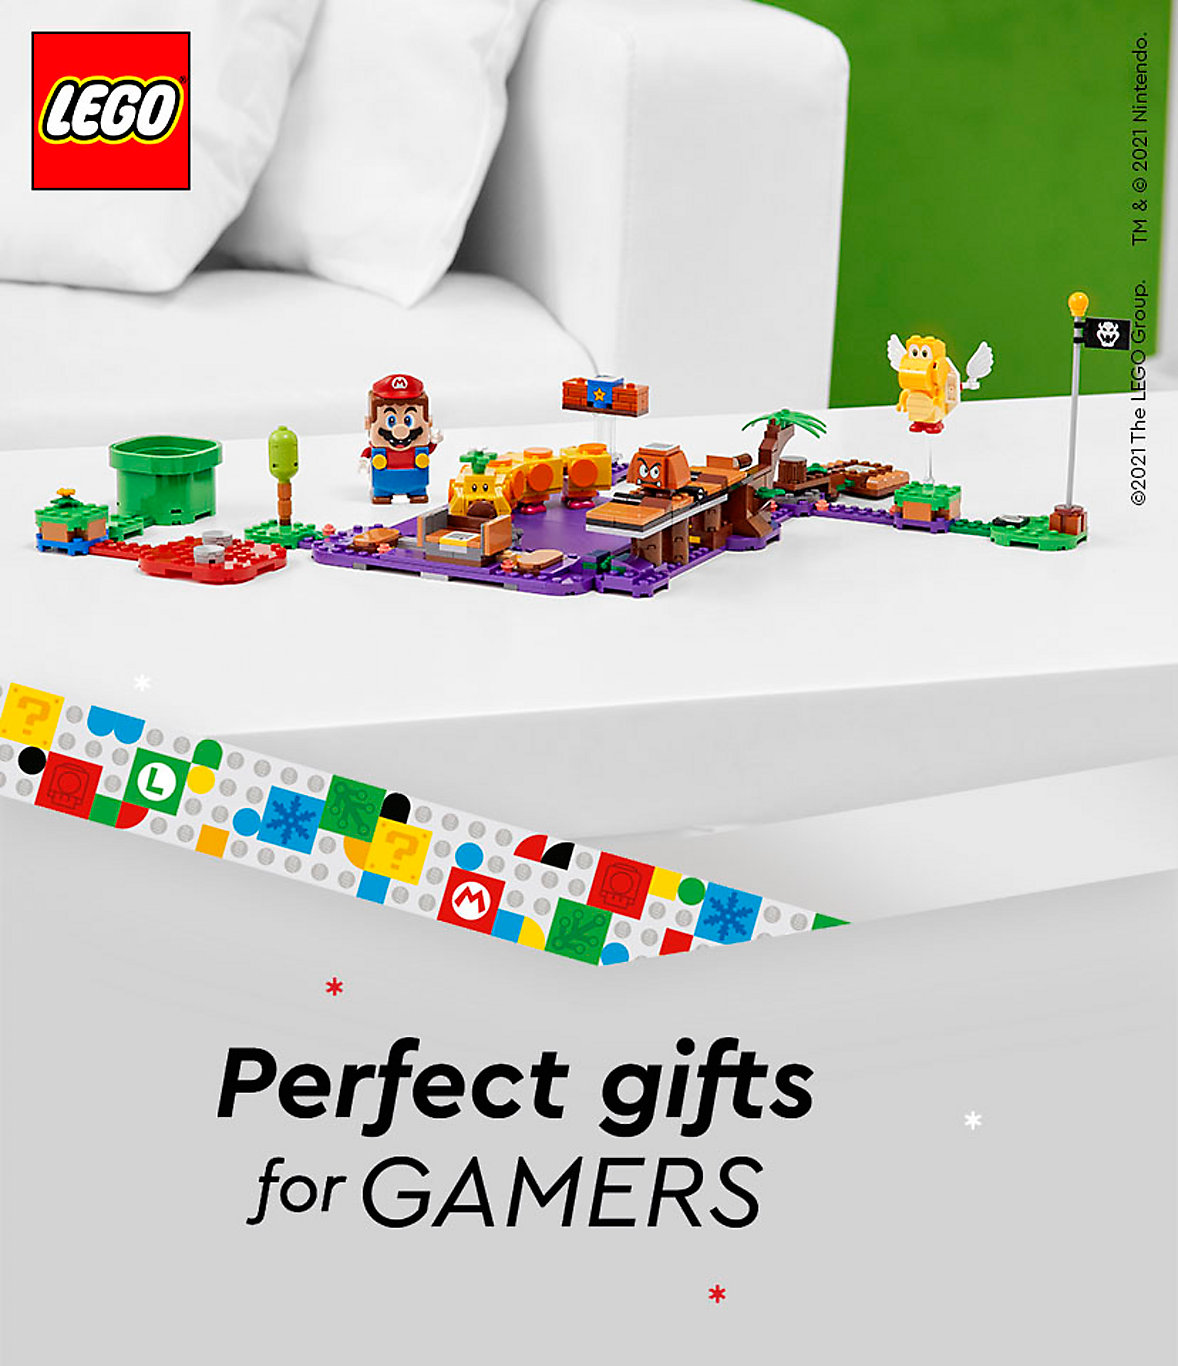 The perfect LEGO gifts for GAMERS